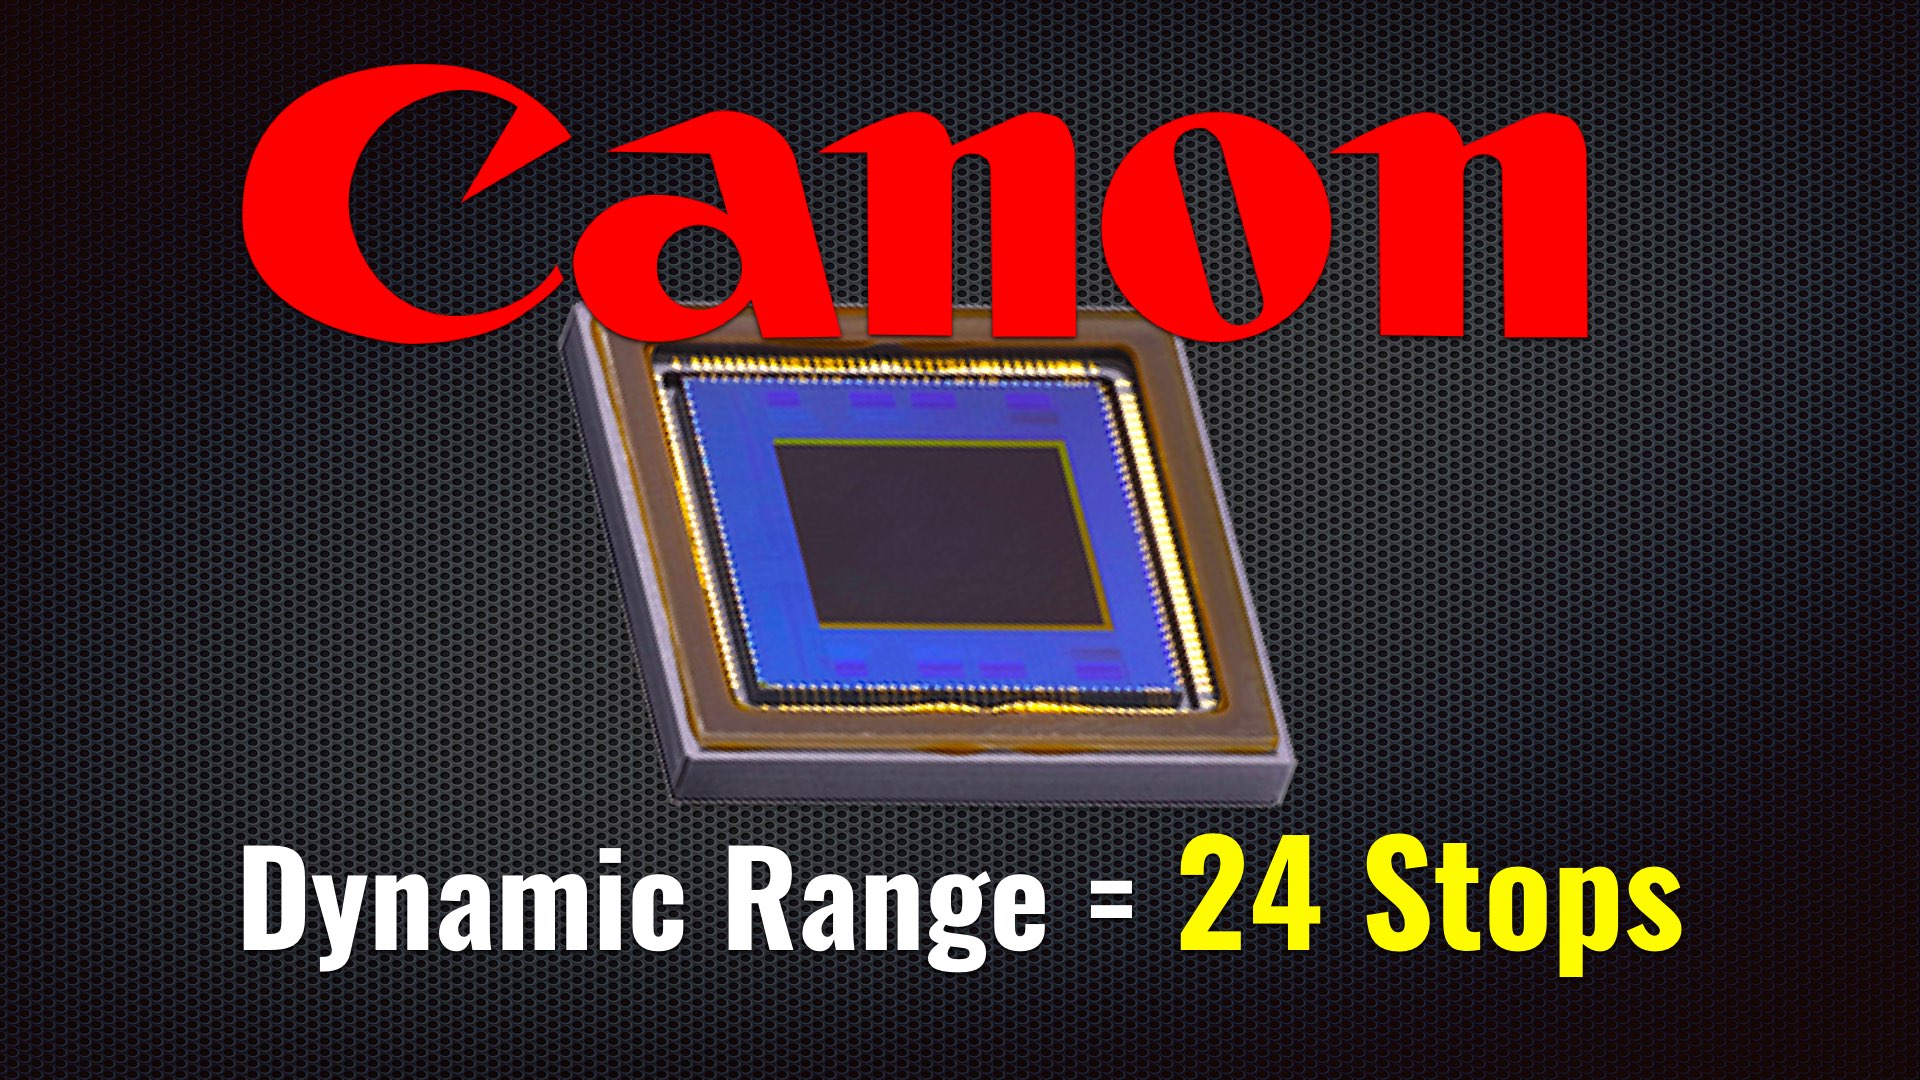 Canon has developed a CMOS sensor with an “industry-leading” dynamic range (24 stops). The sensor incorporates an innovative automatic exp